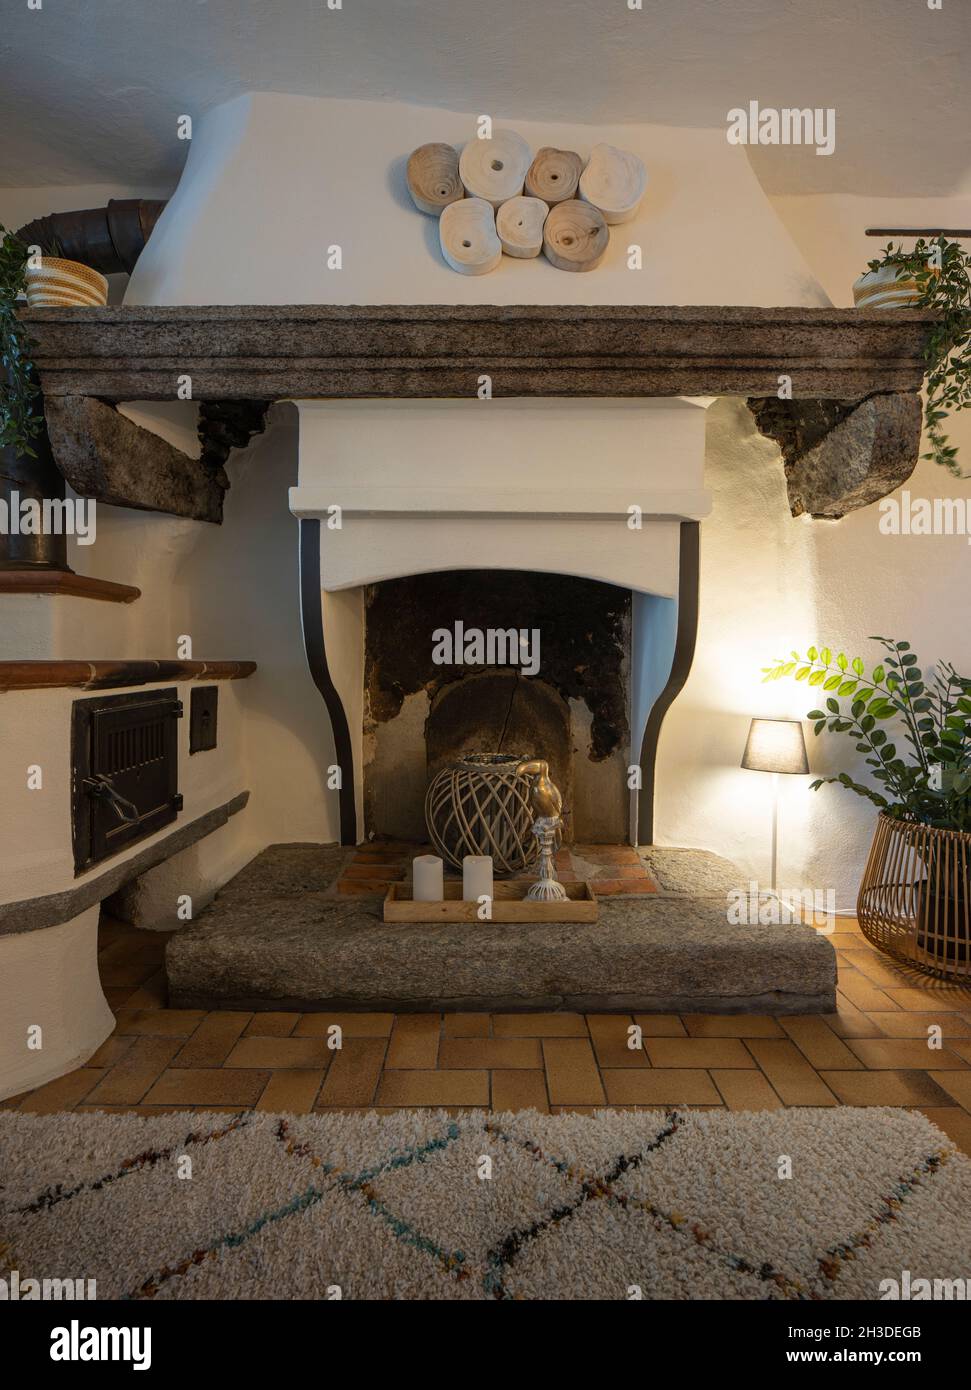 Front view of a fireplace in the living room of a mountain house. Tiles and a carpet on the floor. Nobody inside Stock Photo